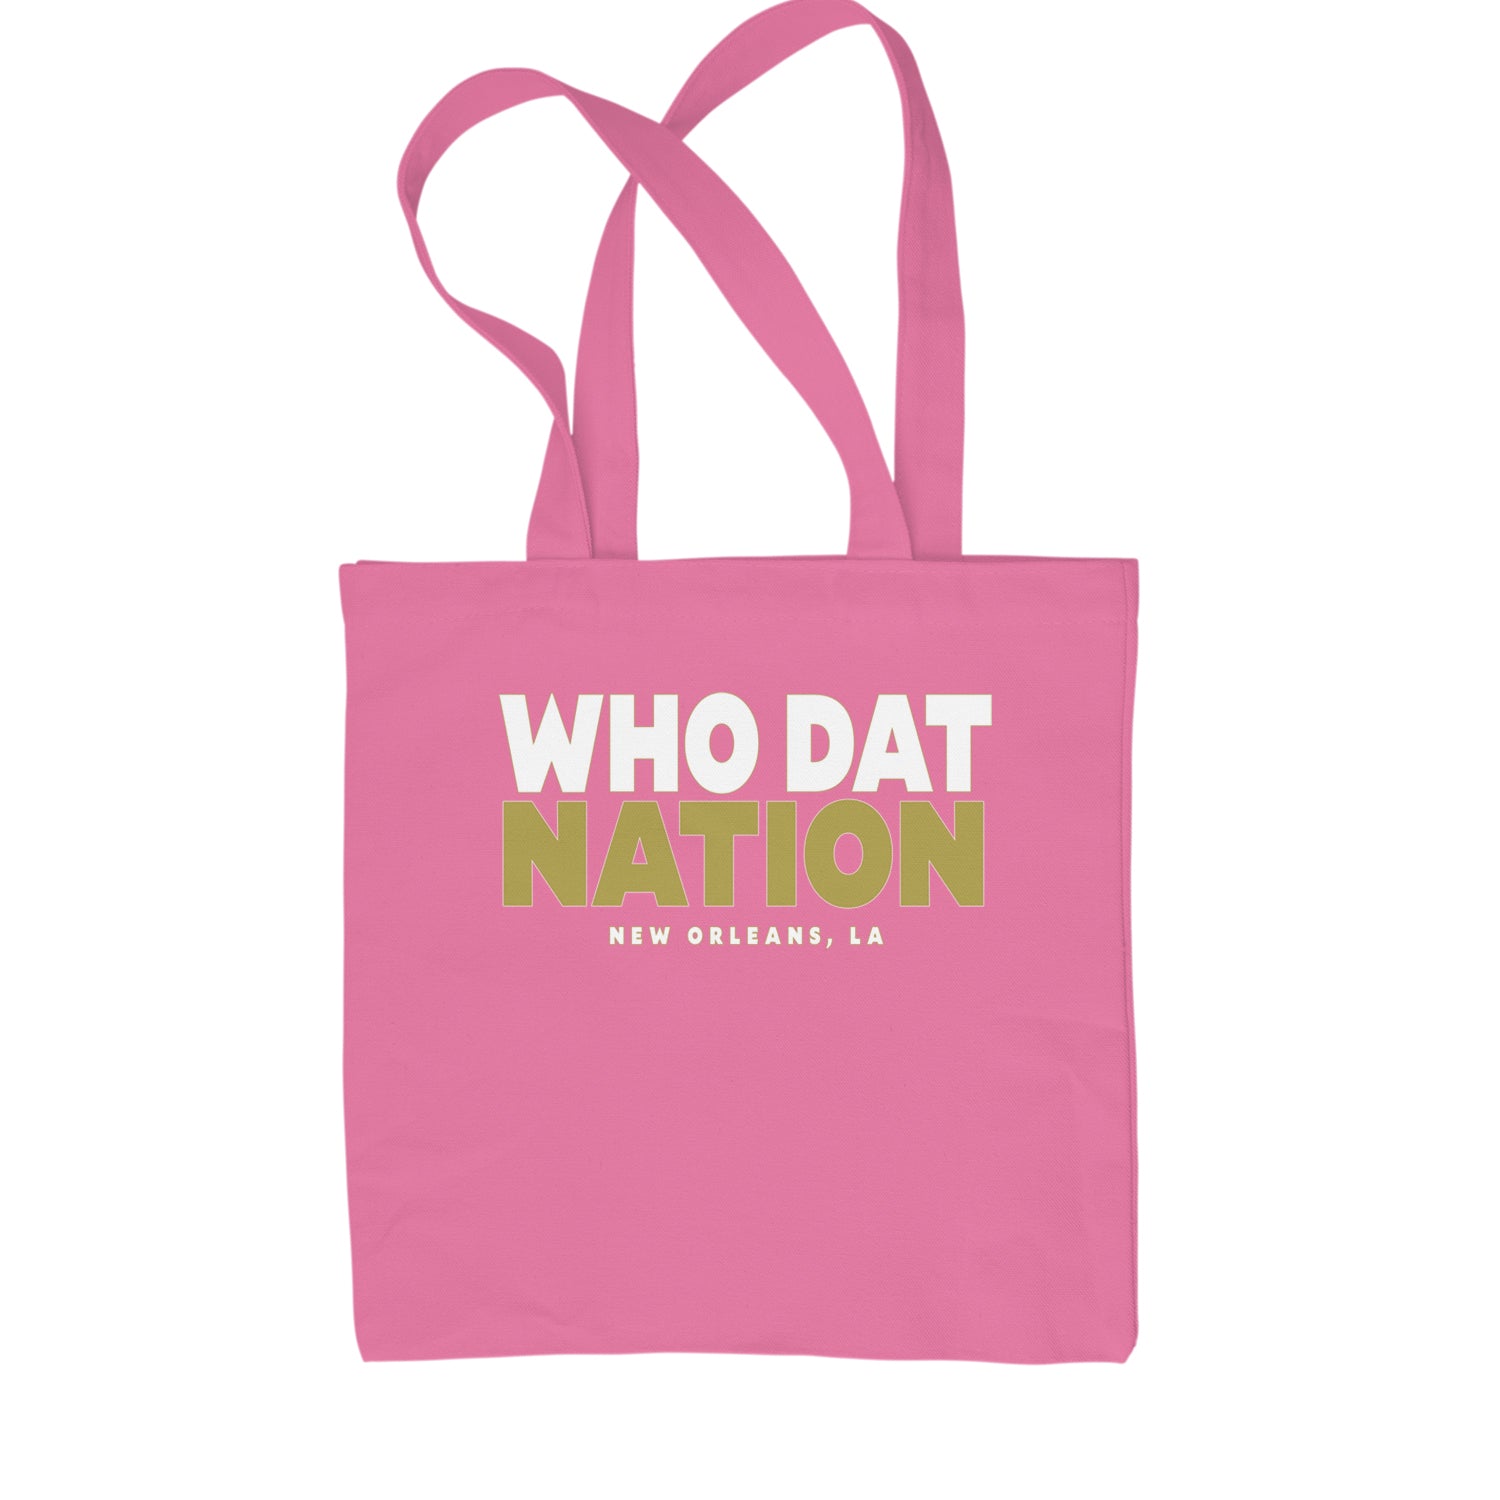 New Orleans Who Dat Nation Shopping Tote Bag Pink